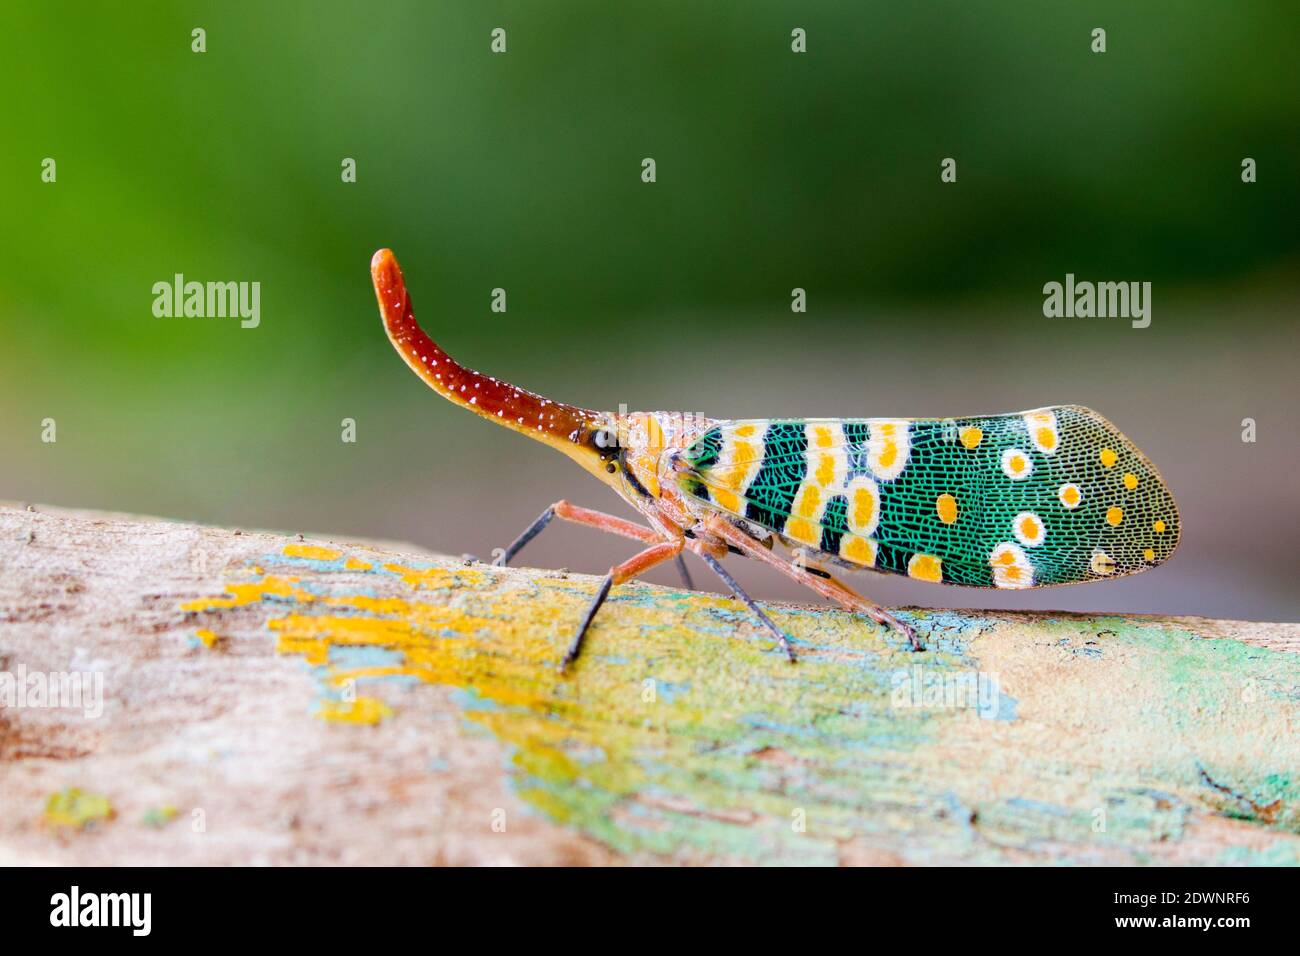 Image of Pyrops candelaria or lantern Fly on nature background. Bug, Insect. Stock Photo